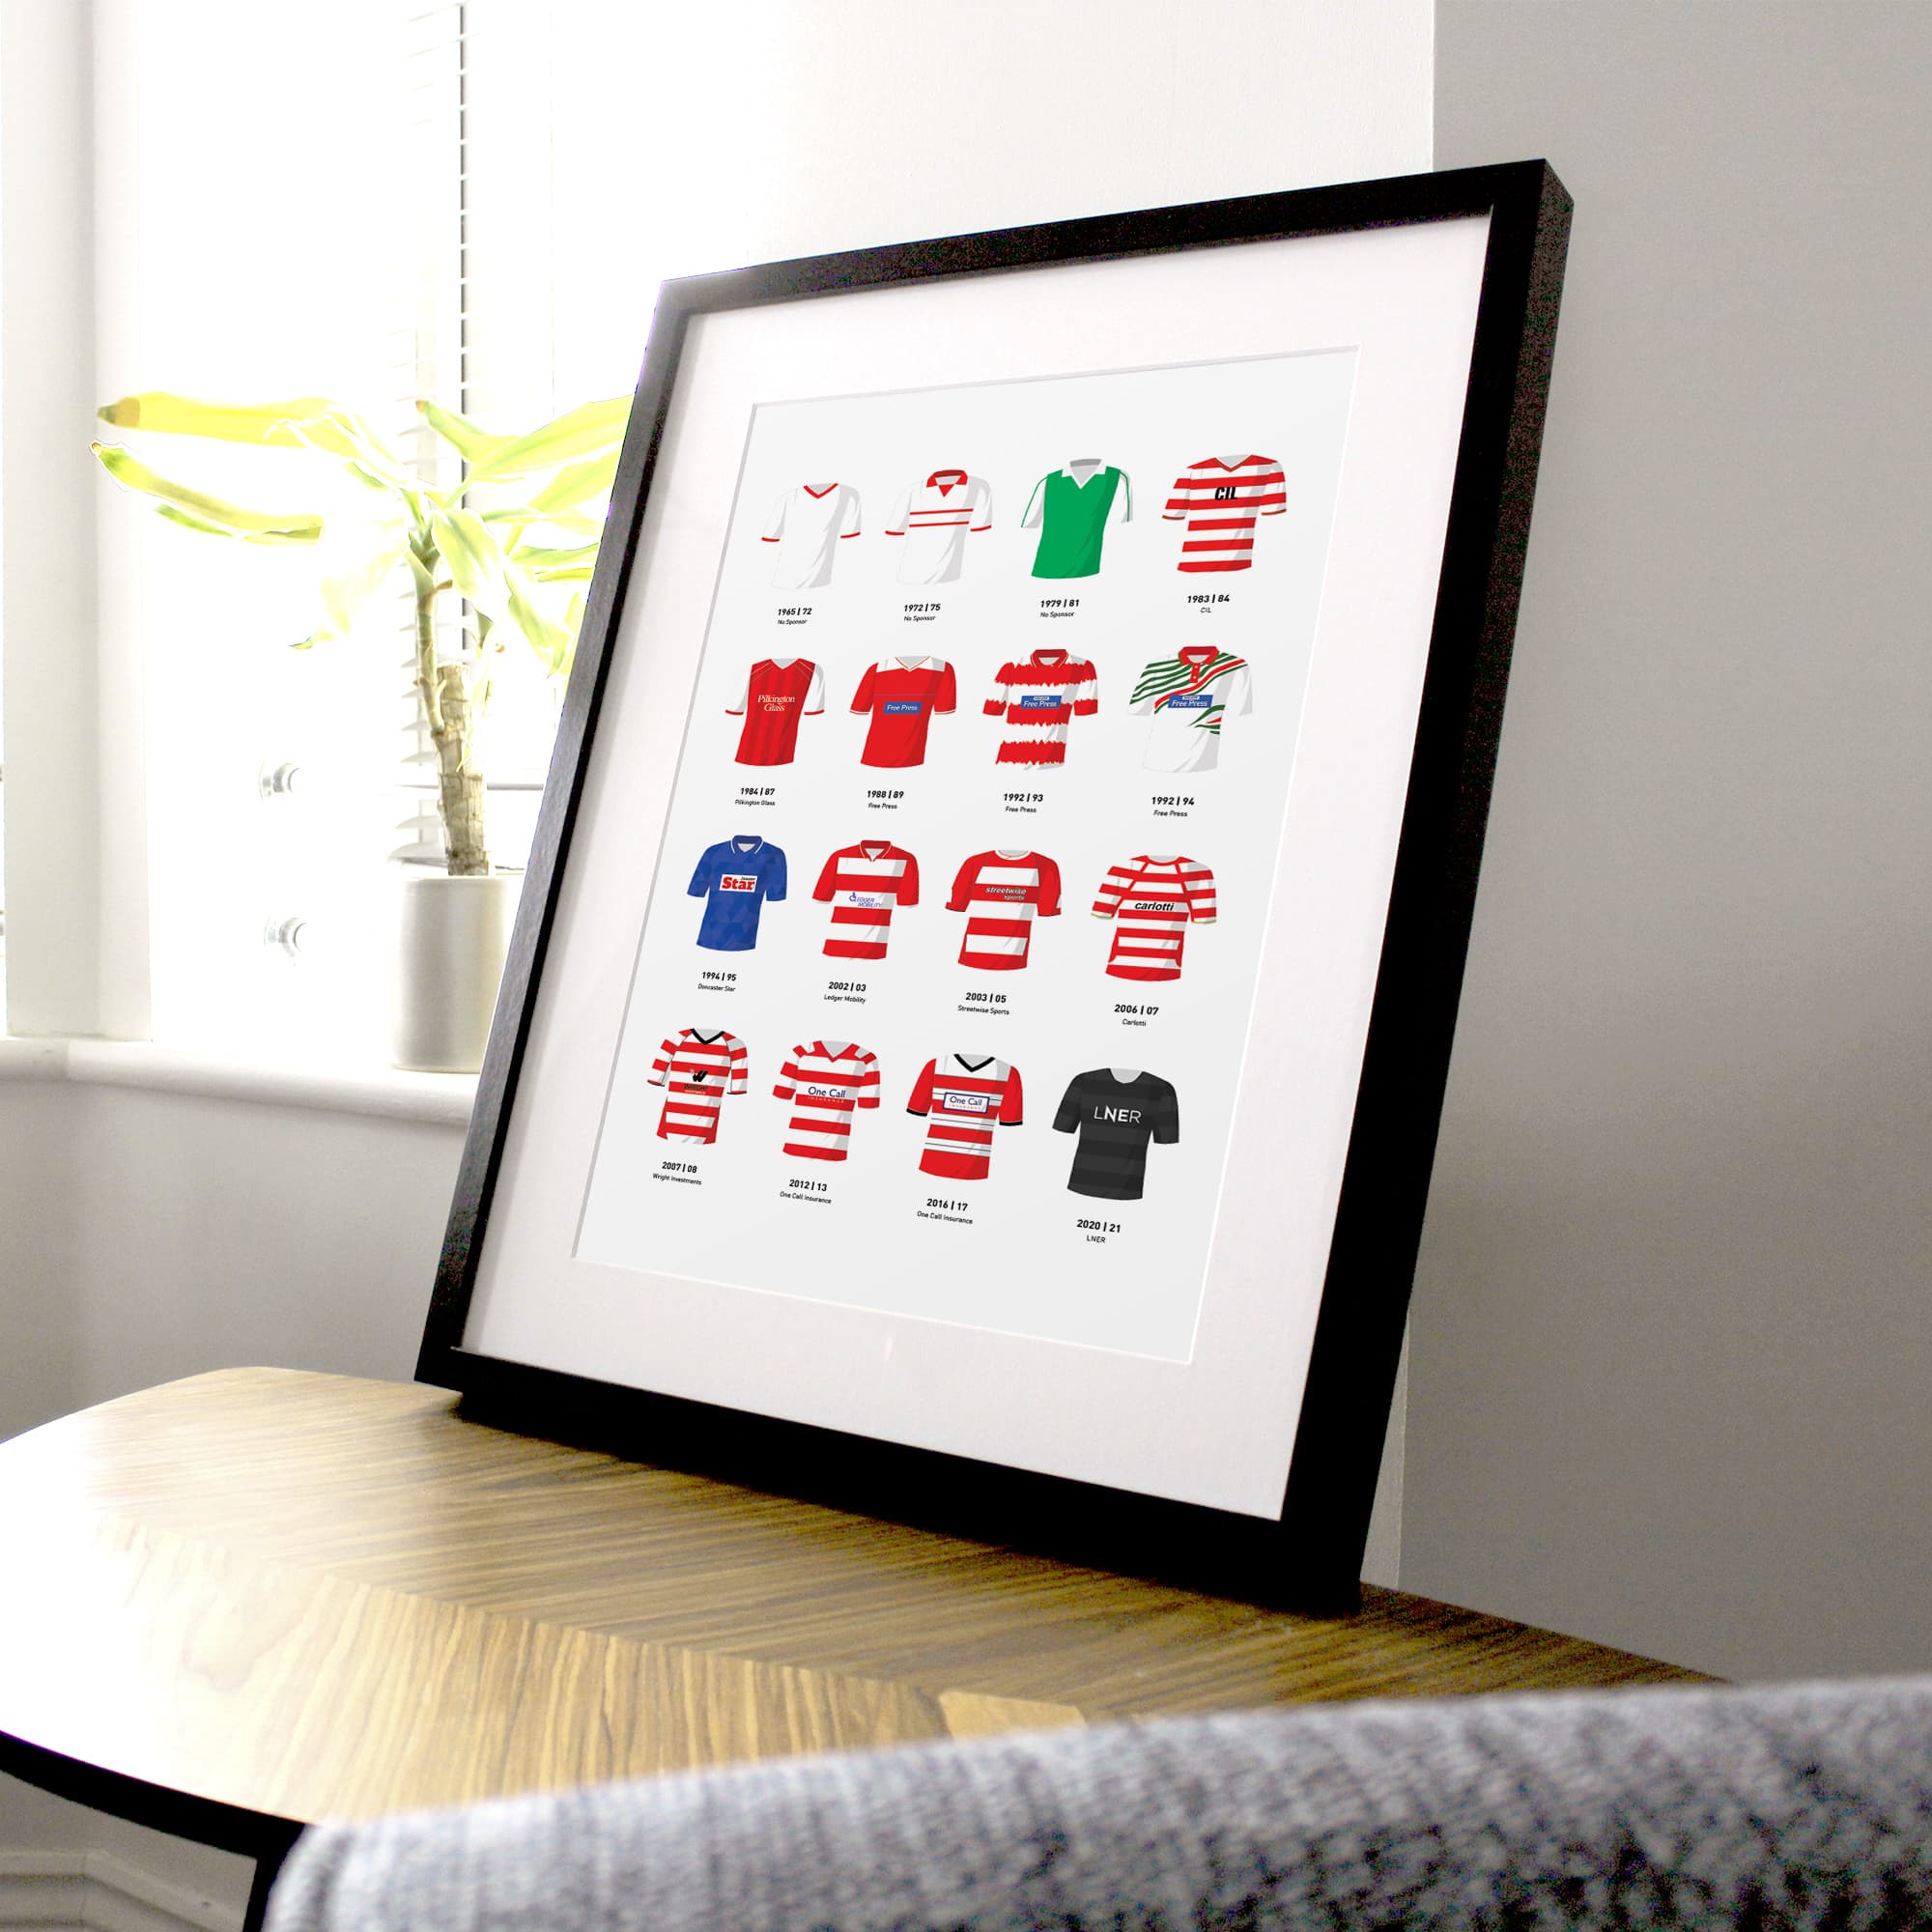 Doncaster Classic Kits Football Team Print Good Team On Paper